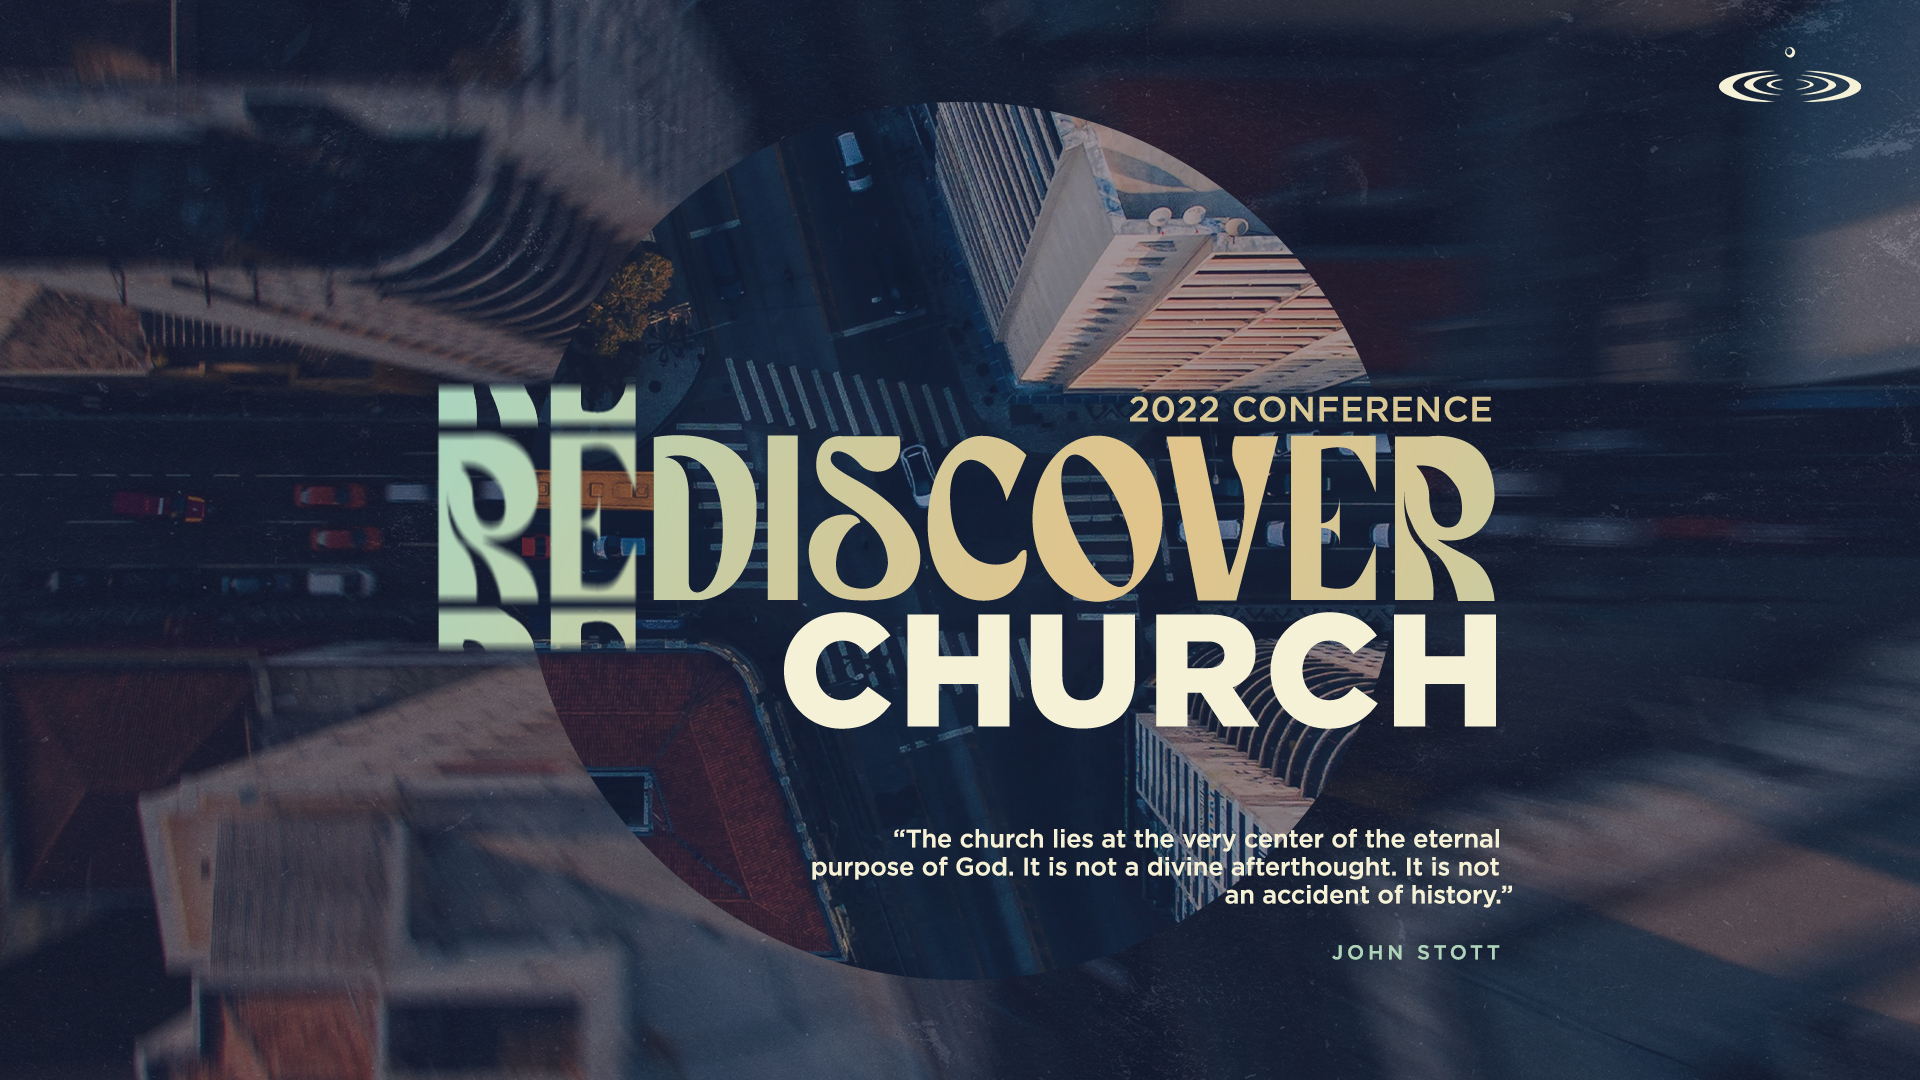 Rediscover Church – Part 1: The Church Gathered